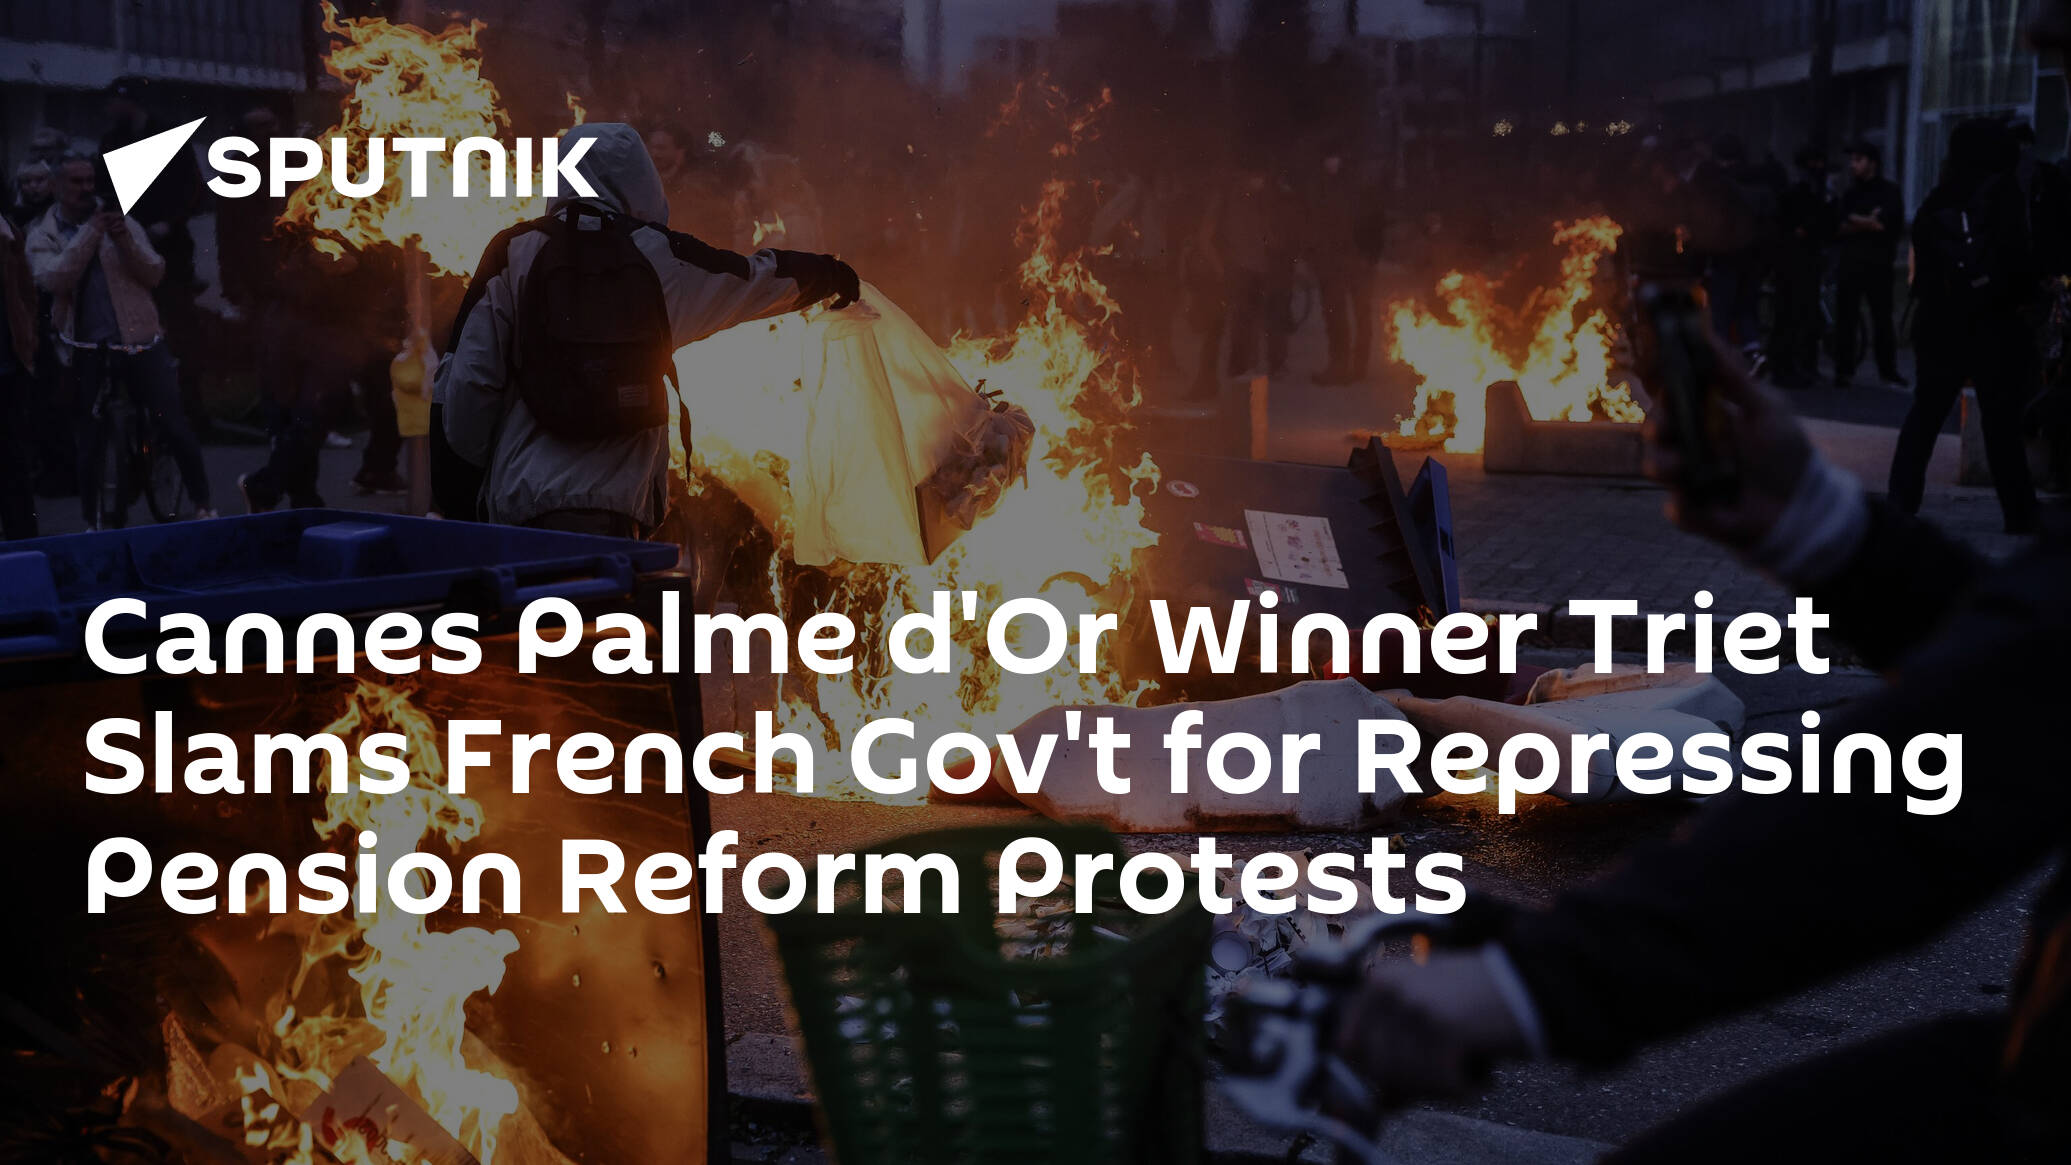 Cannes Palme d'Or Winner Triet Slams French Gov't for Repressing Pension Reform Protests